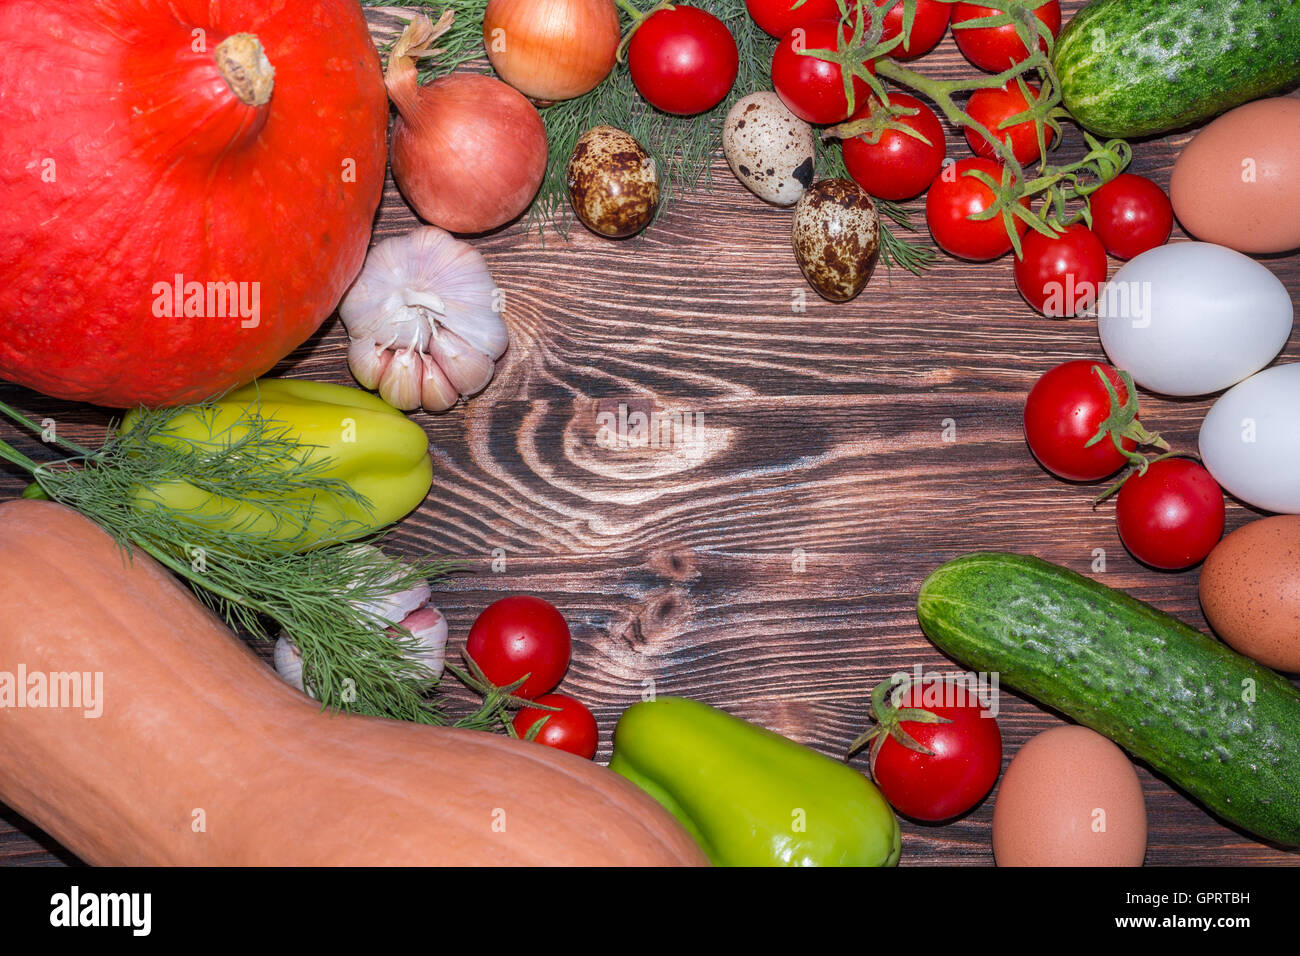 Bright Thanksgiving harvest composition of vegetables onions, cucumbers, peppers pumkin, calabash, tomatoes, garlic, eggs on dar Stock Photo